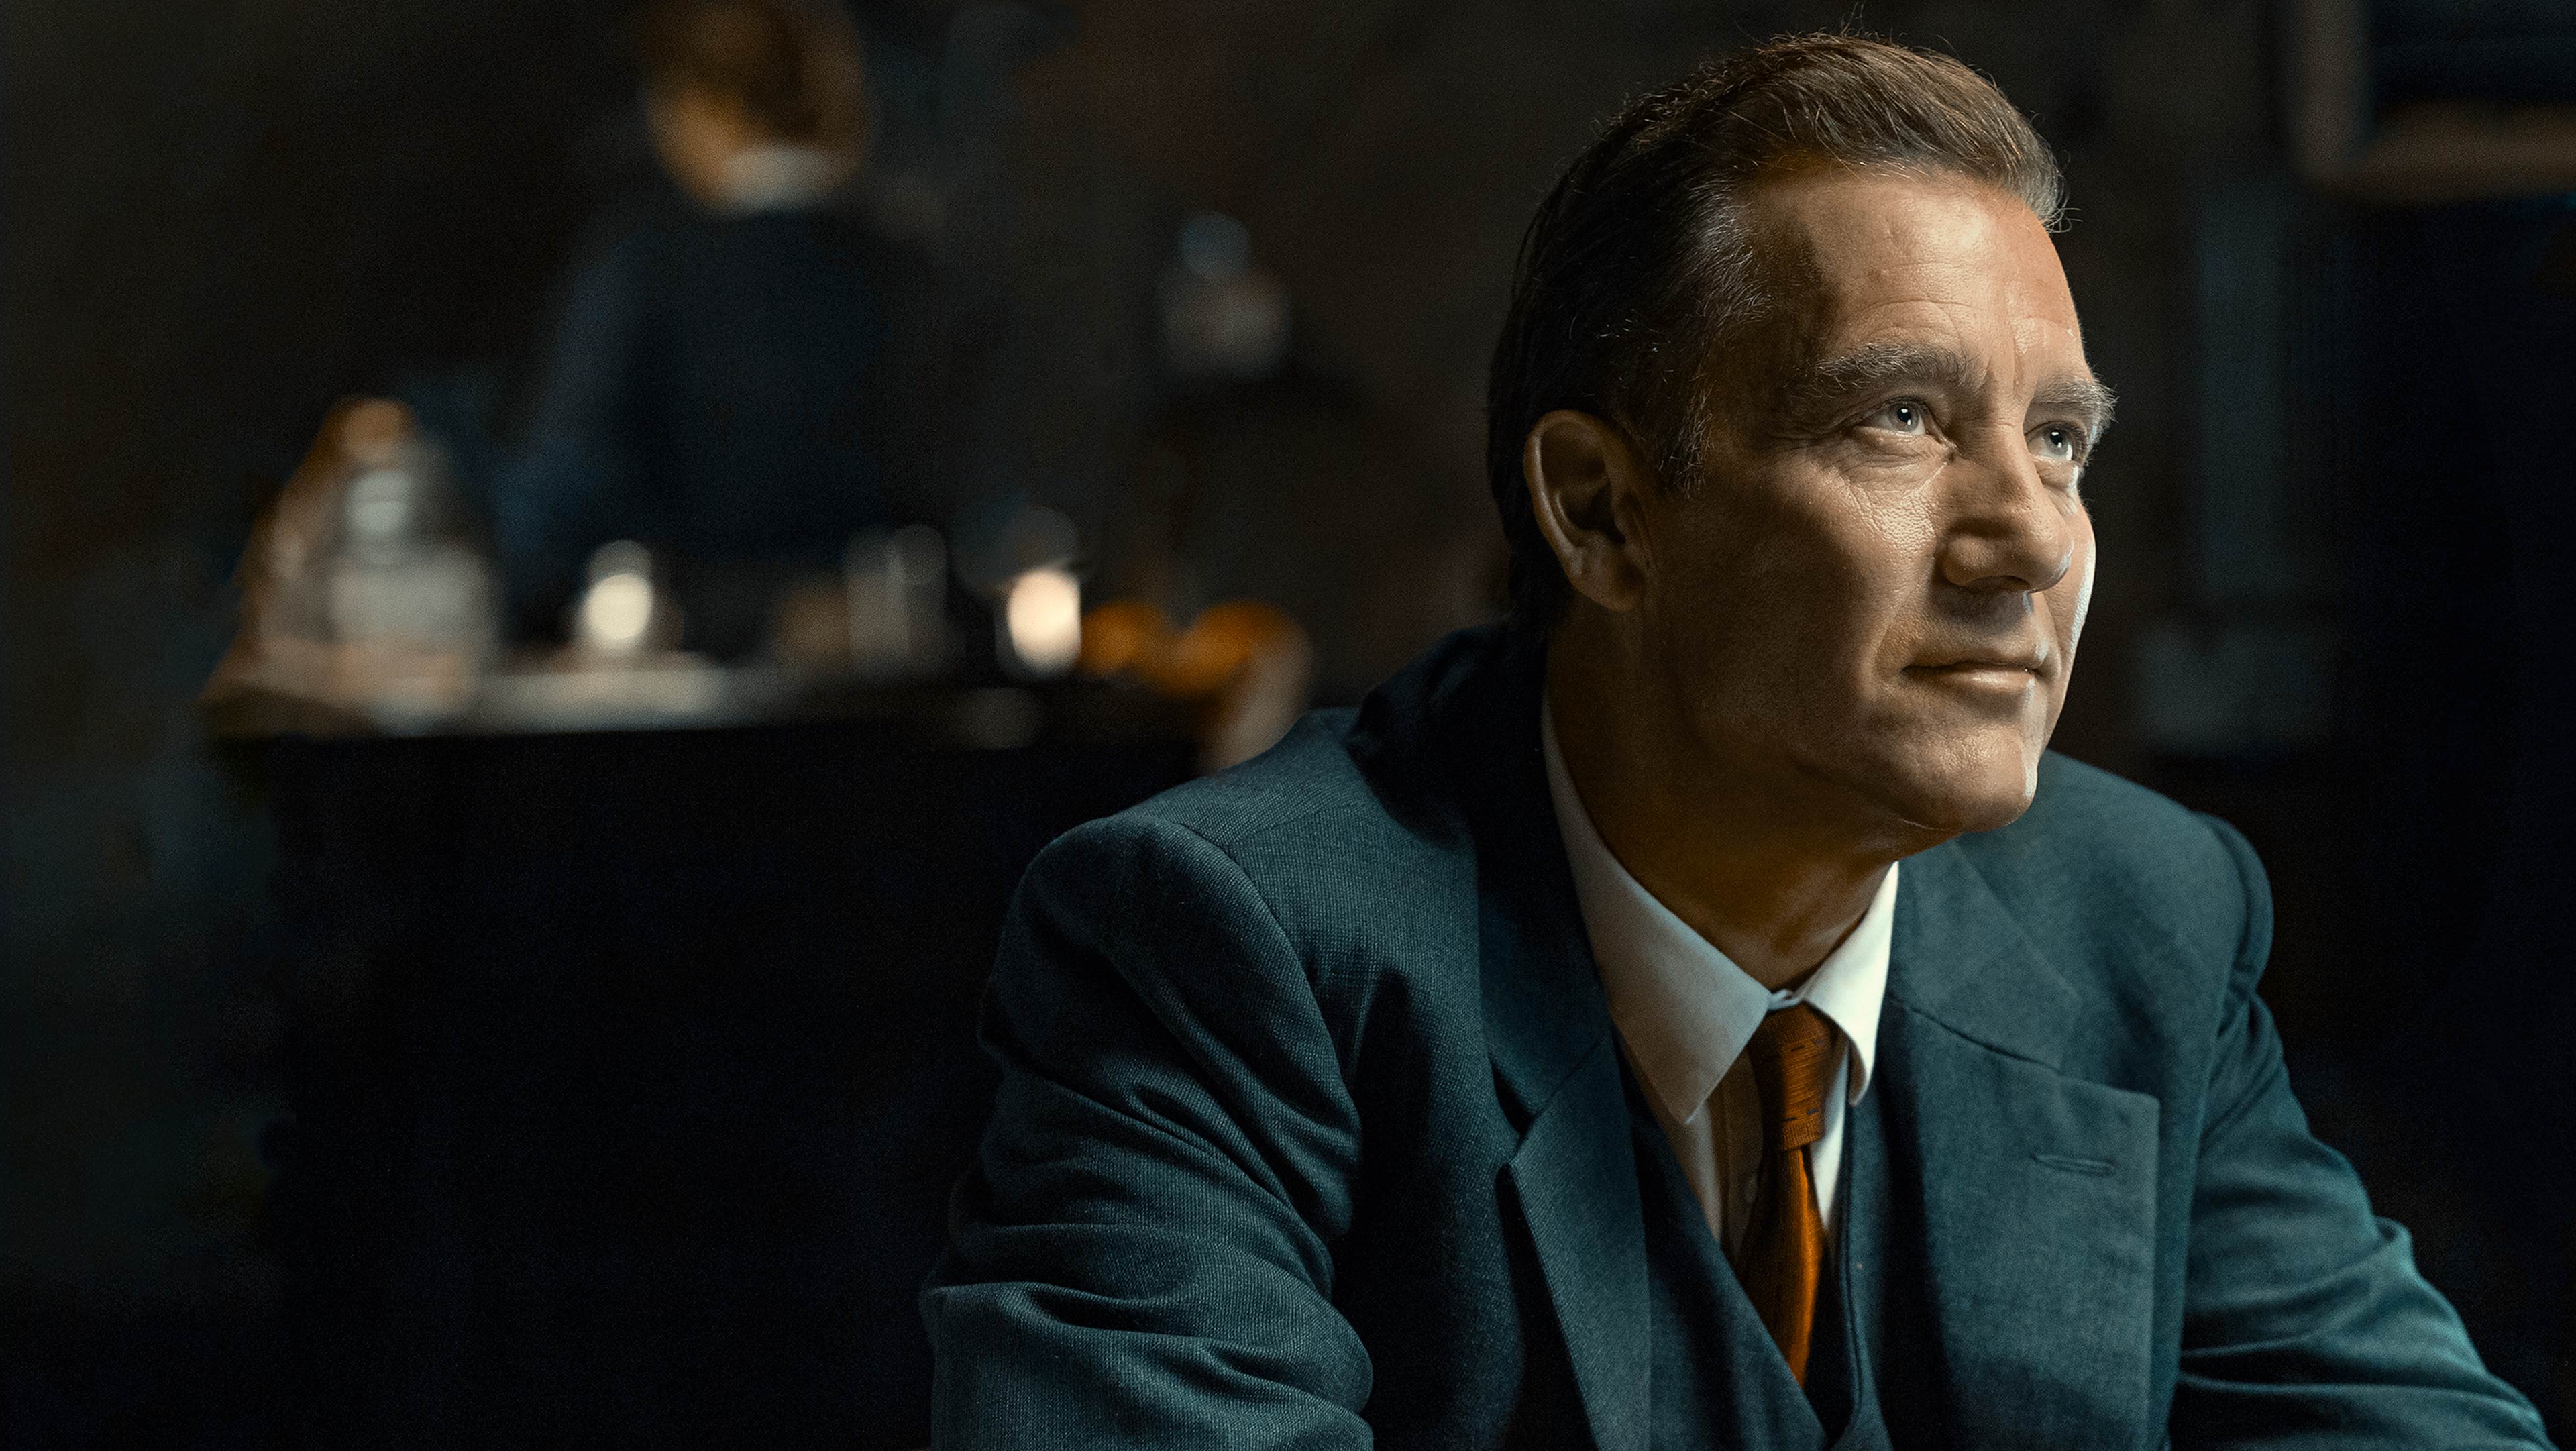 Check Out Clive Owen in the Trailer for Monsieur Spade